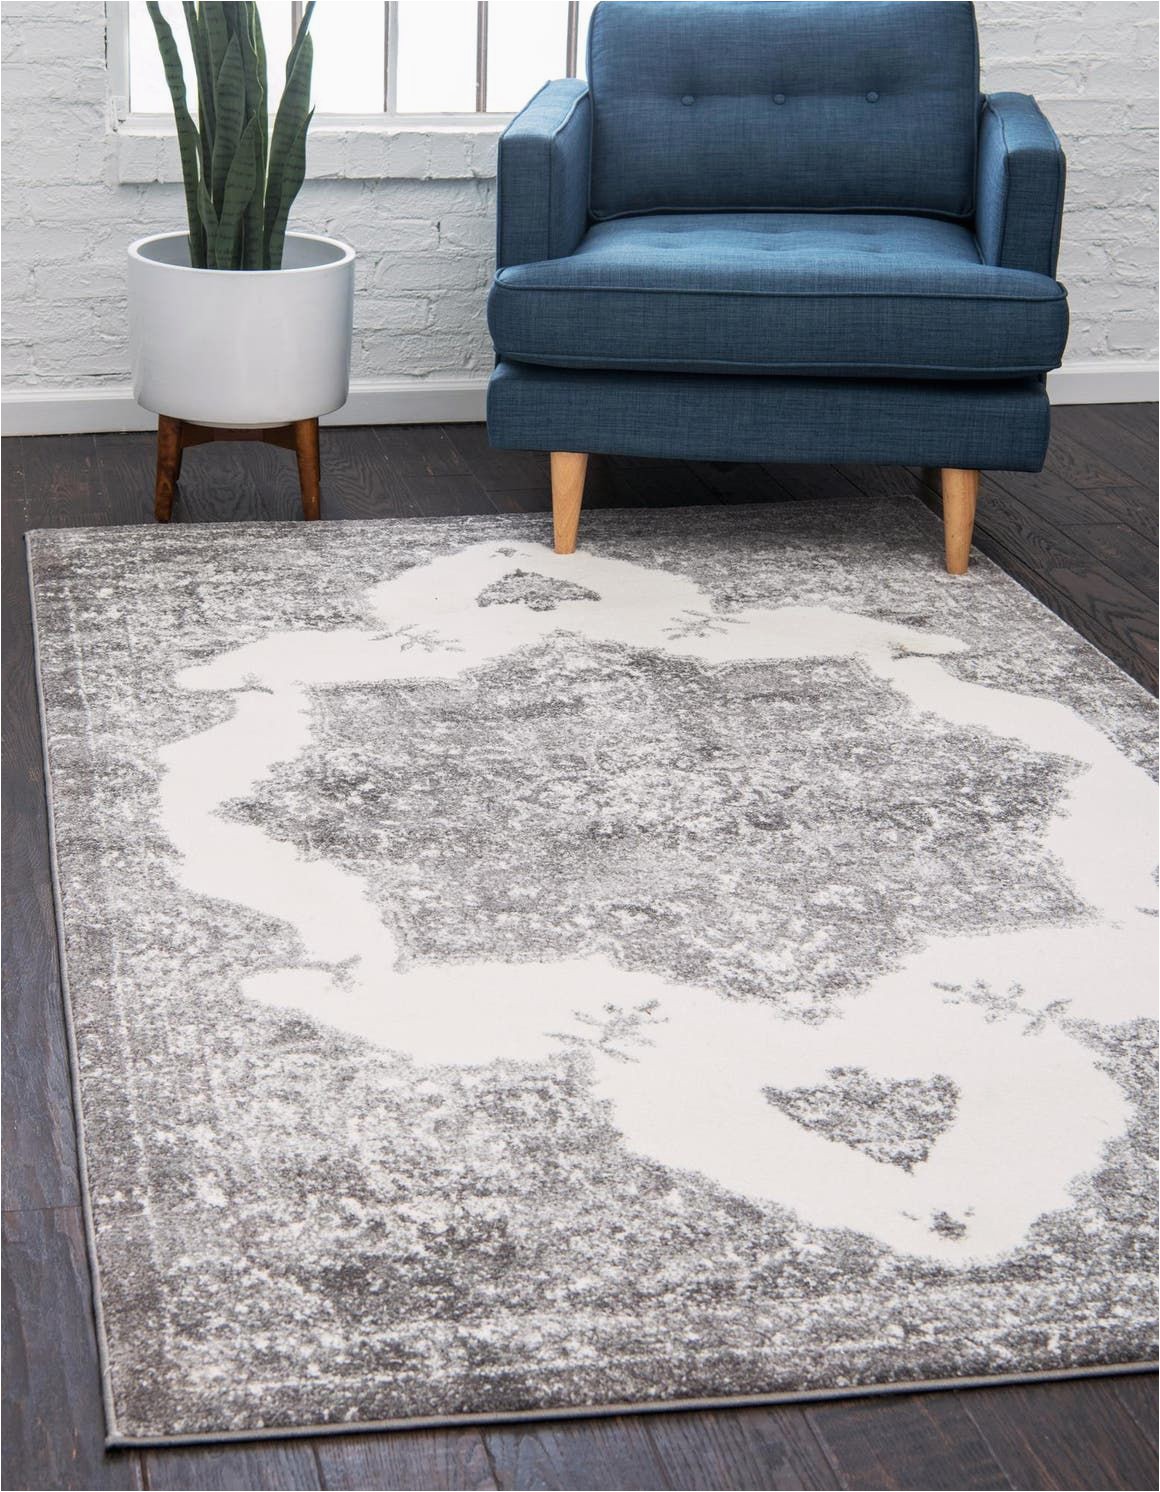 Large Gray and White area Rug Brighella Gray Vintage 9×12 area Rug In 2020